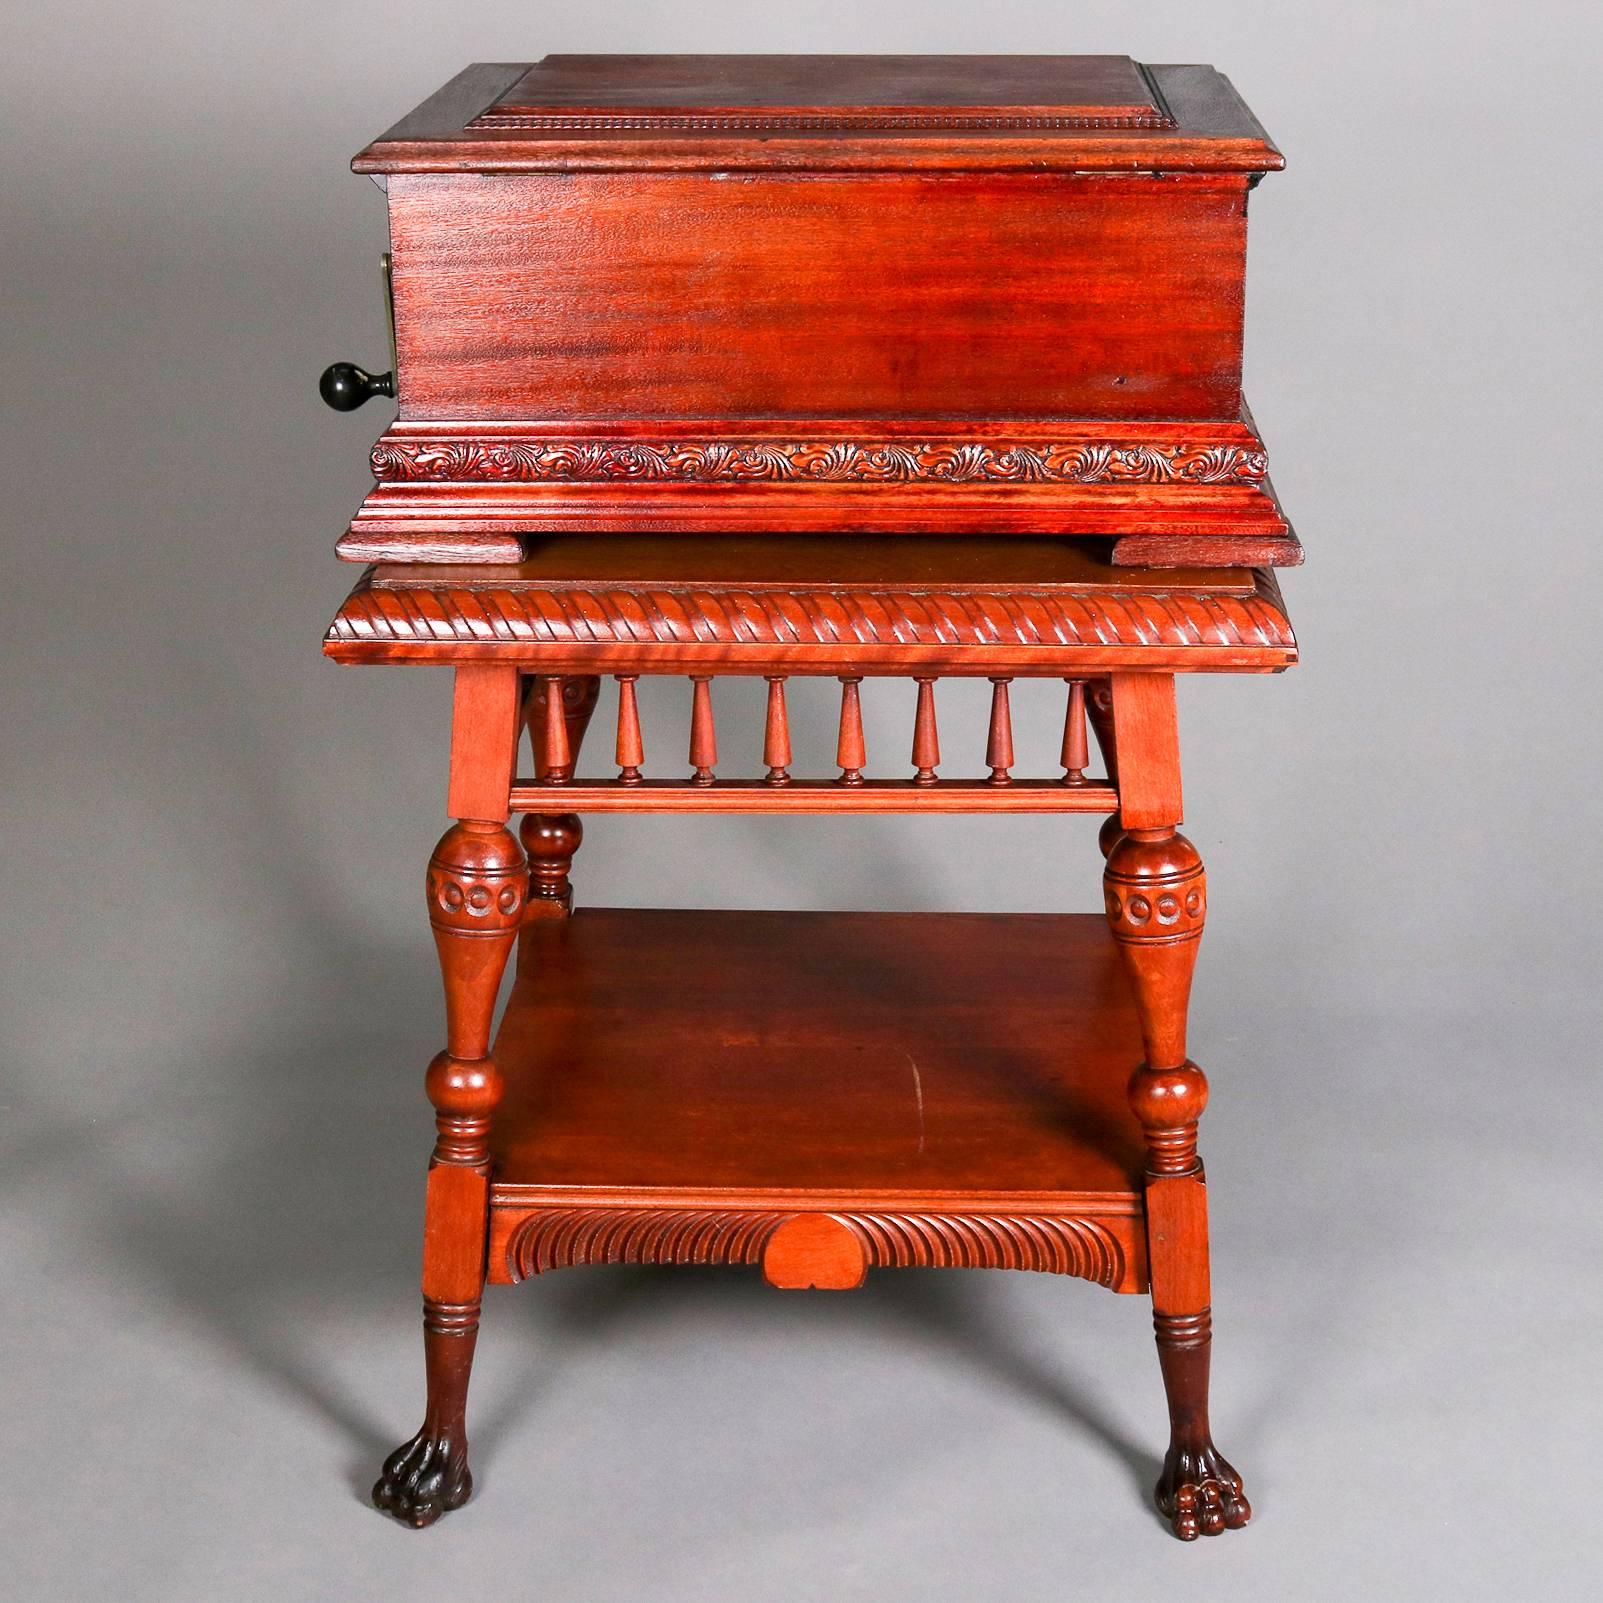 Antique Stella Double Comb Music Box with Mahogany Case and Stand, 19th Century 3